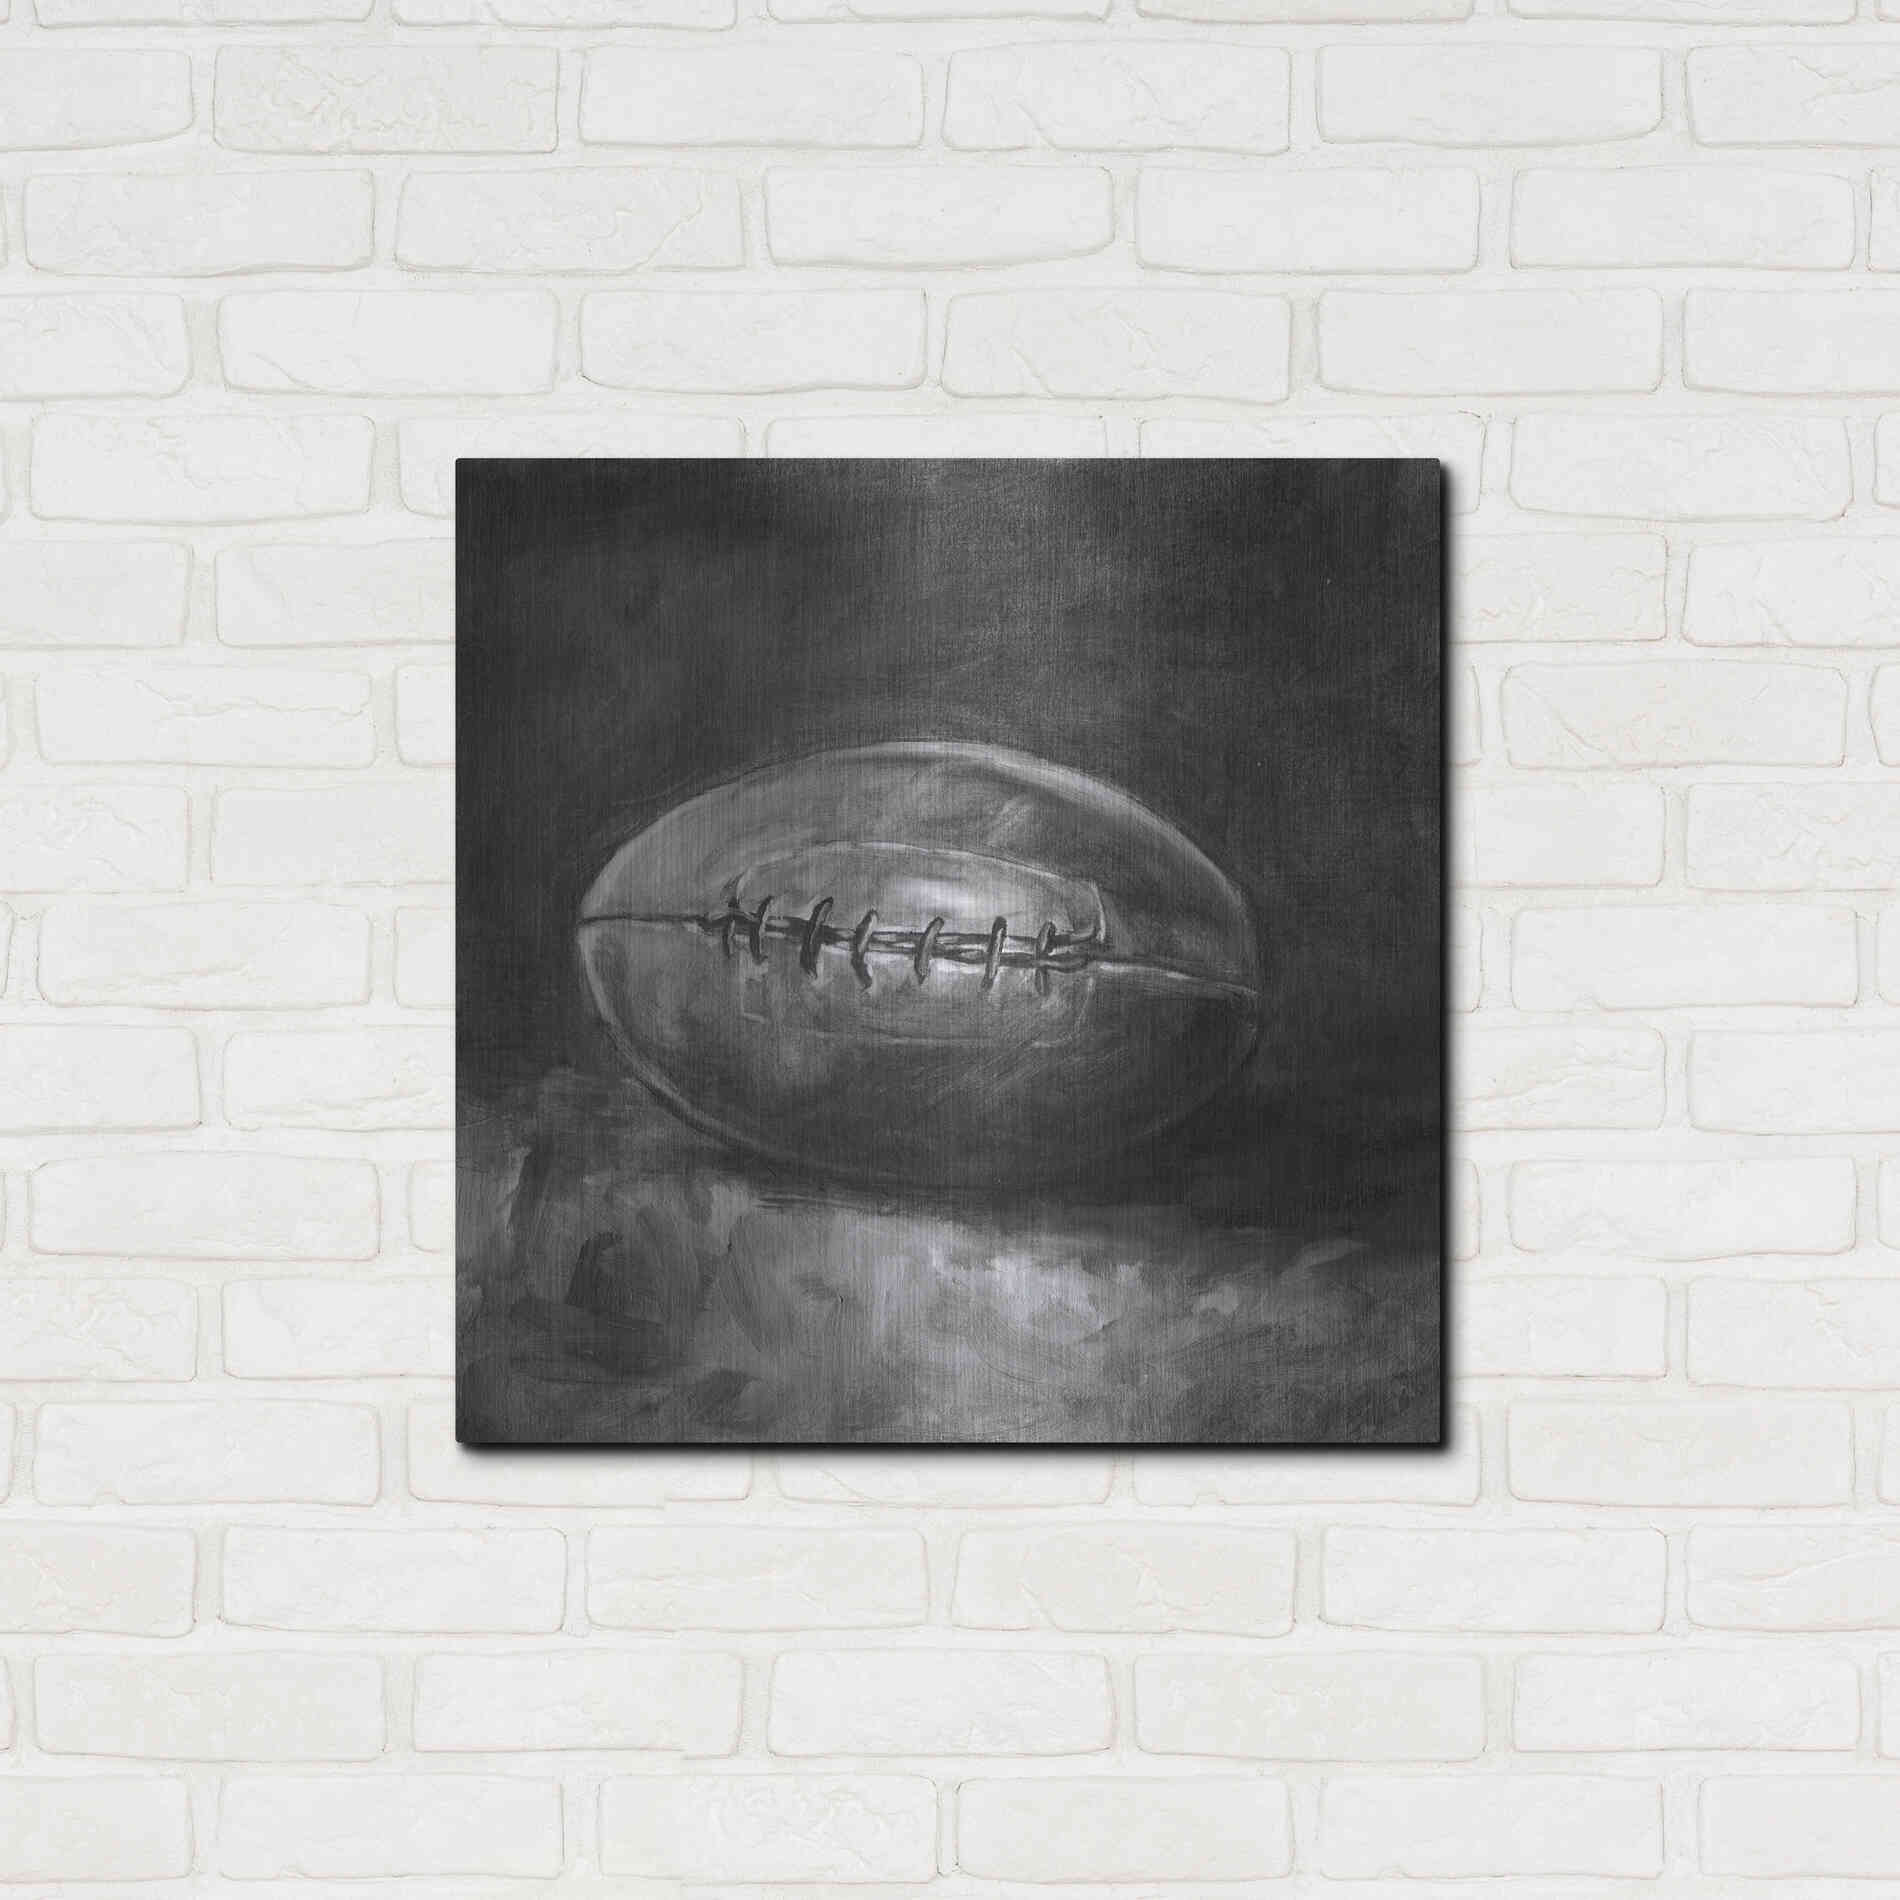 Luxe Metal Art 'Rustic Sports IV Black and White' by Ethan Harper, Metal Wall Art,24x24